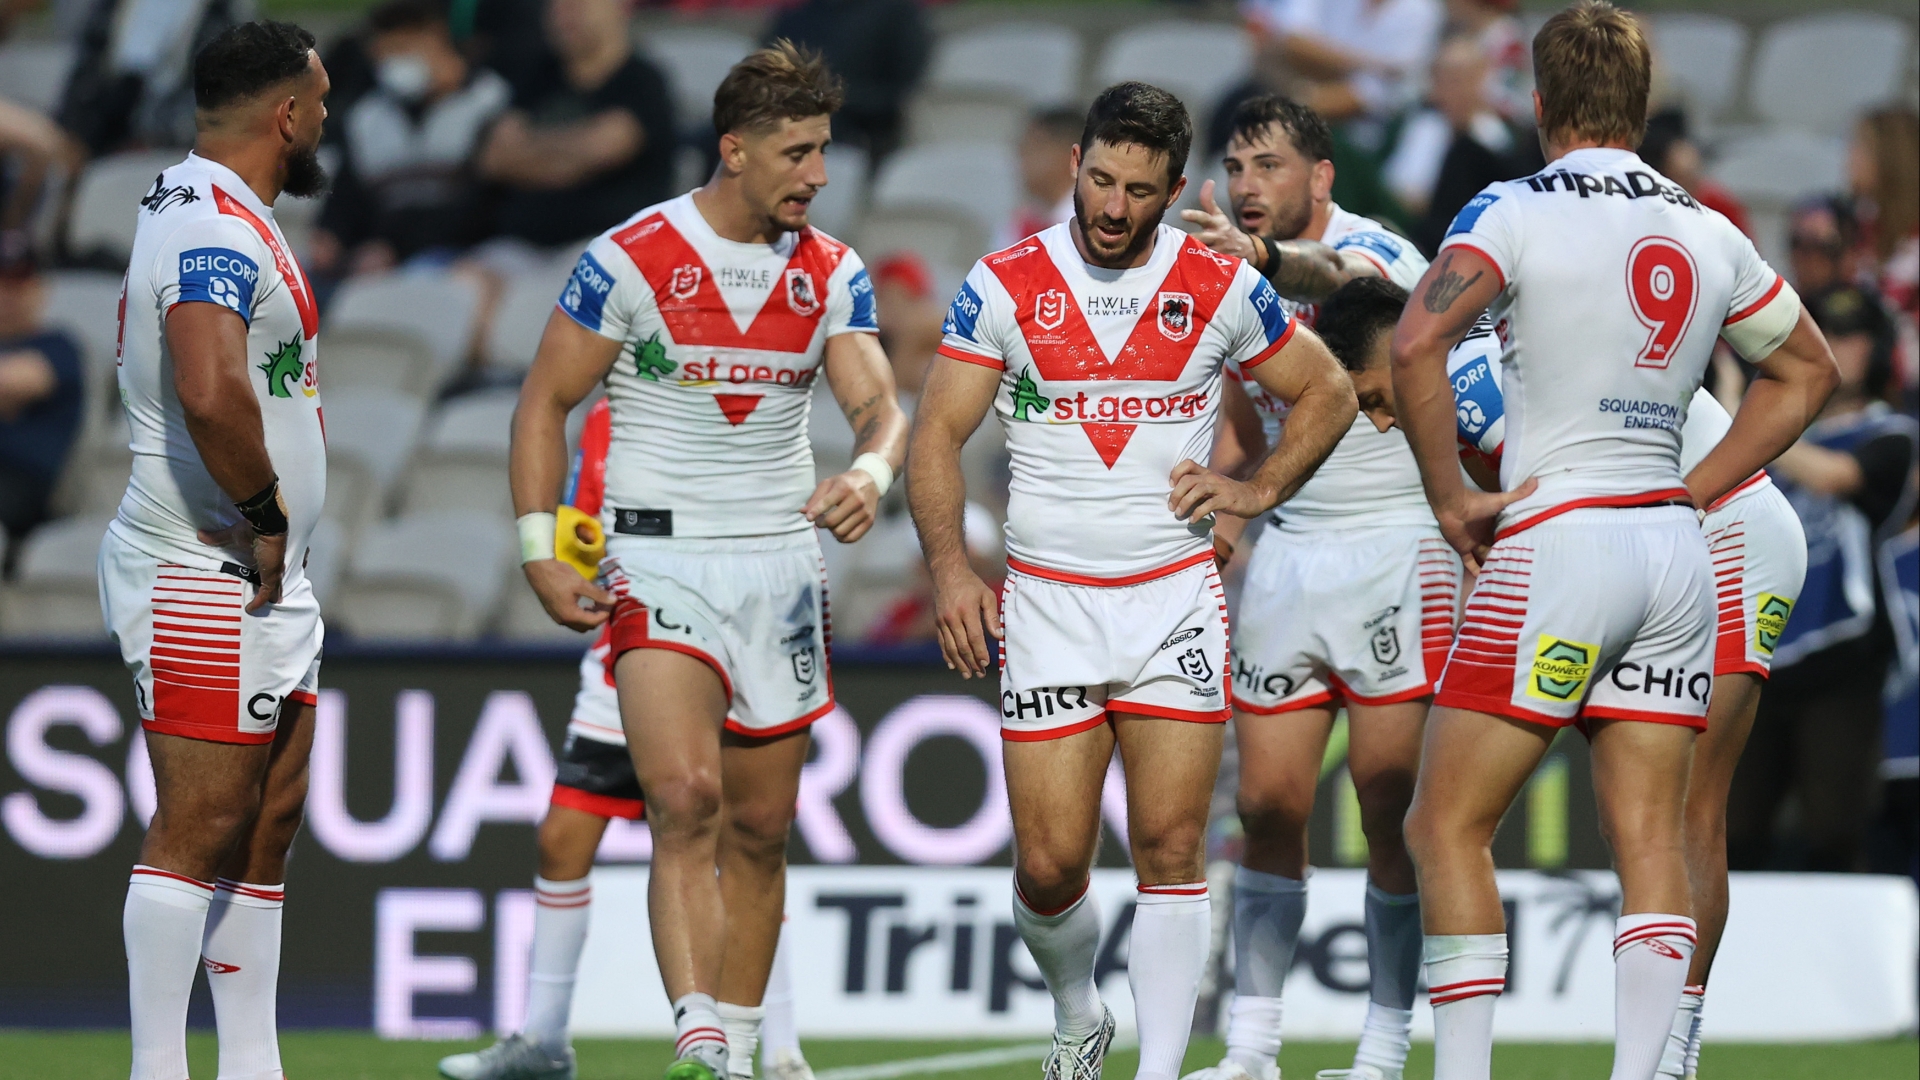 St George Illawarra Dragons vs Manly Sea Eagles Tips & Preview - Dragons'  woes to continue in NRL